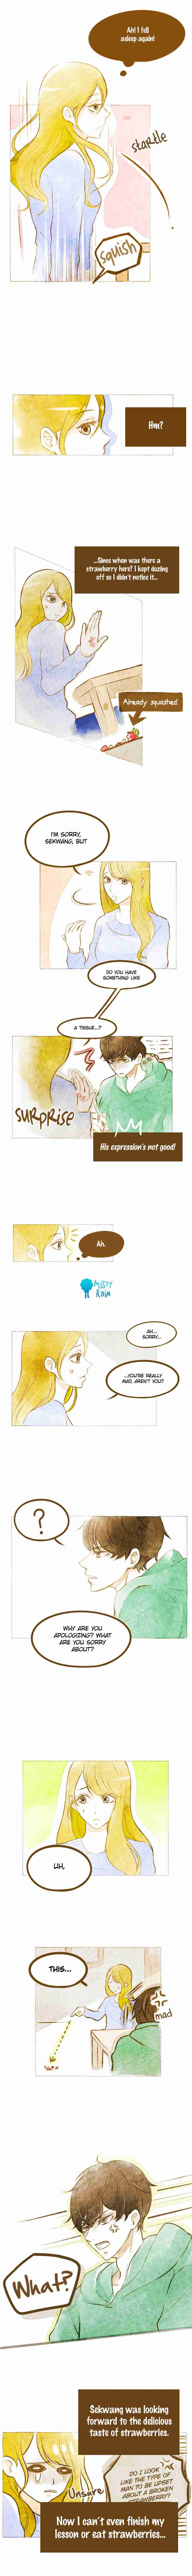 Real My Way Ch. 10